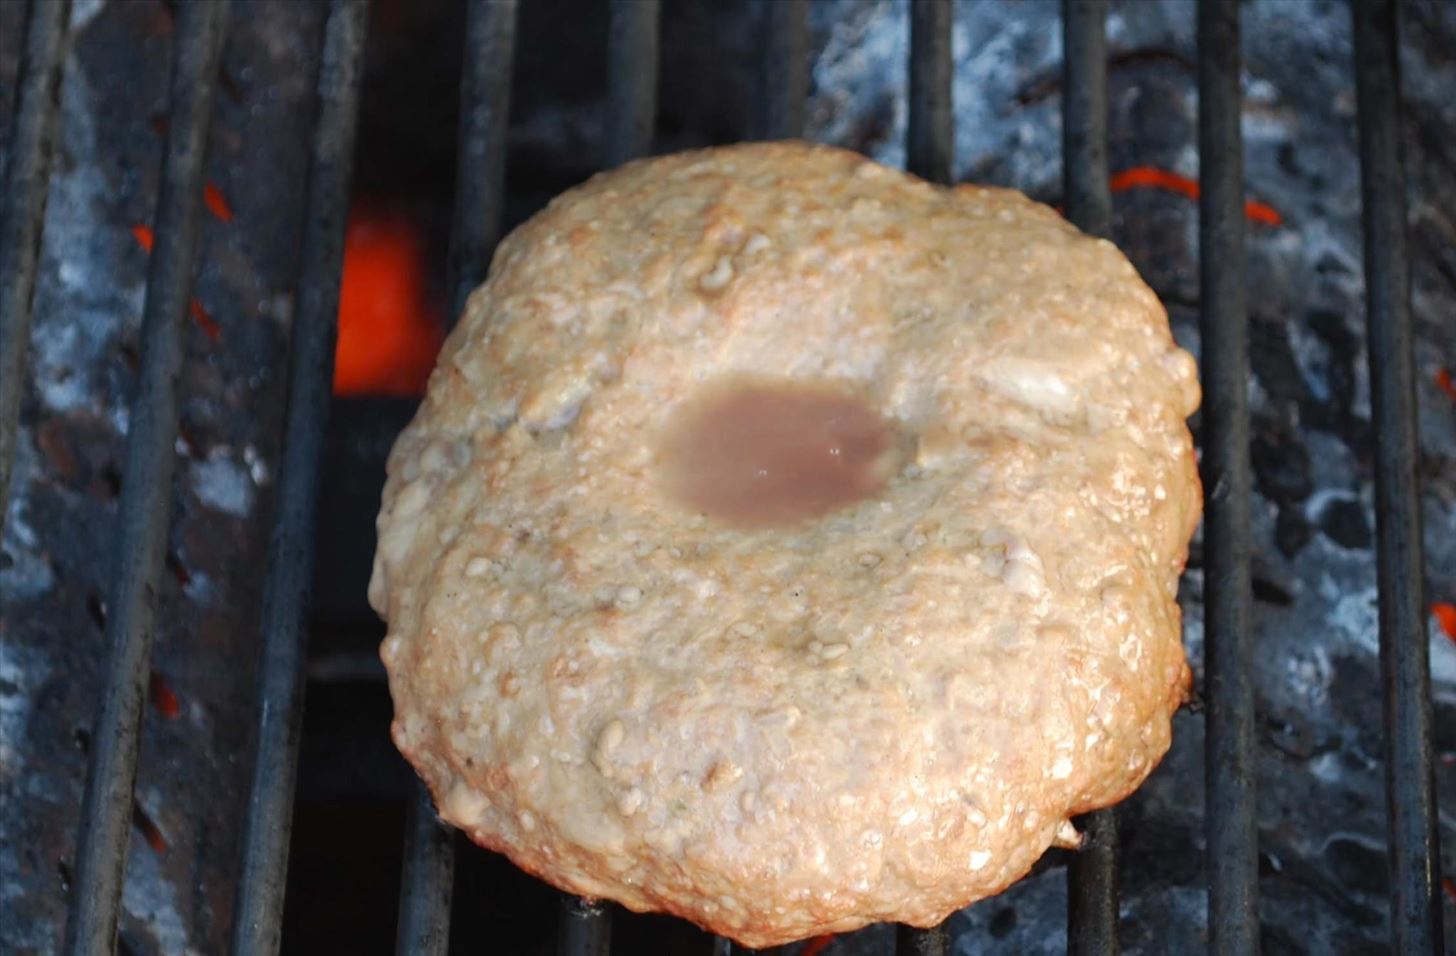 Use Your Thumb for Perfectly Shaped Burger Patties Every Time